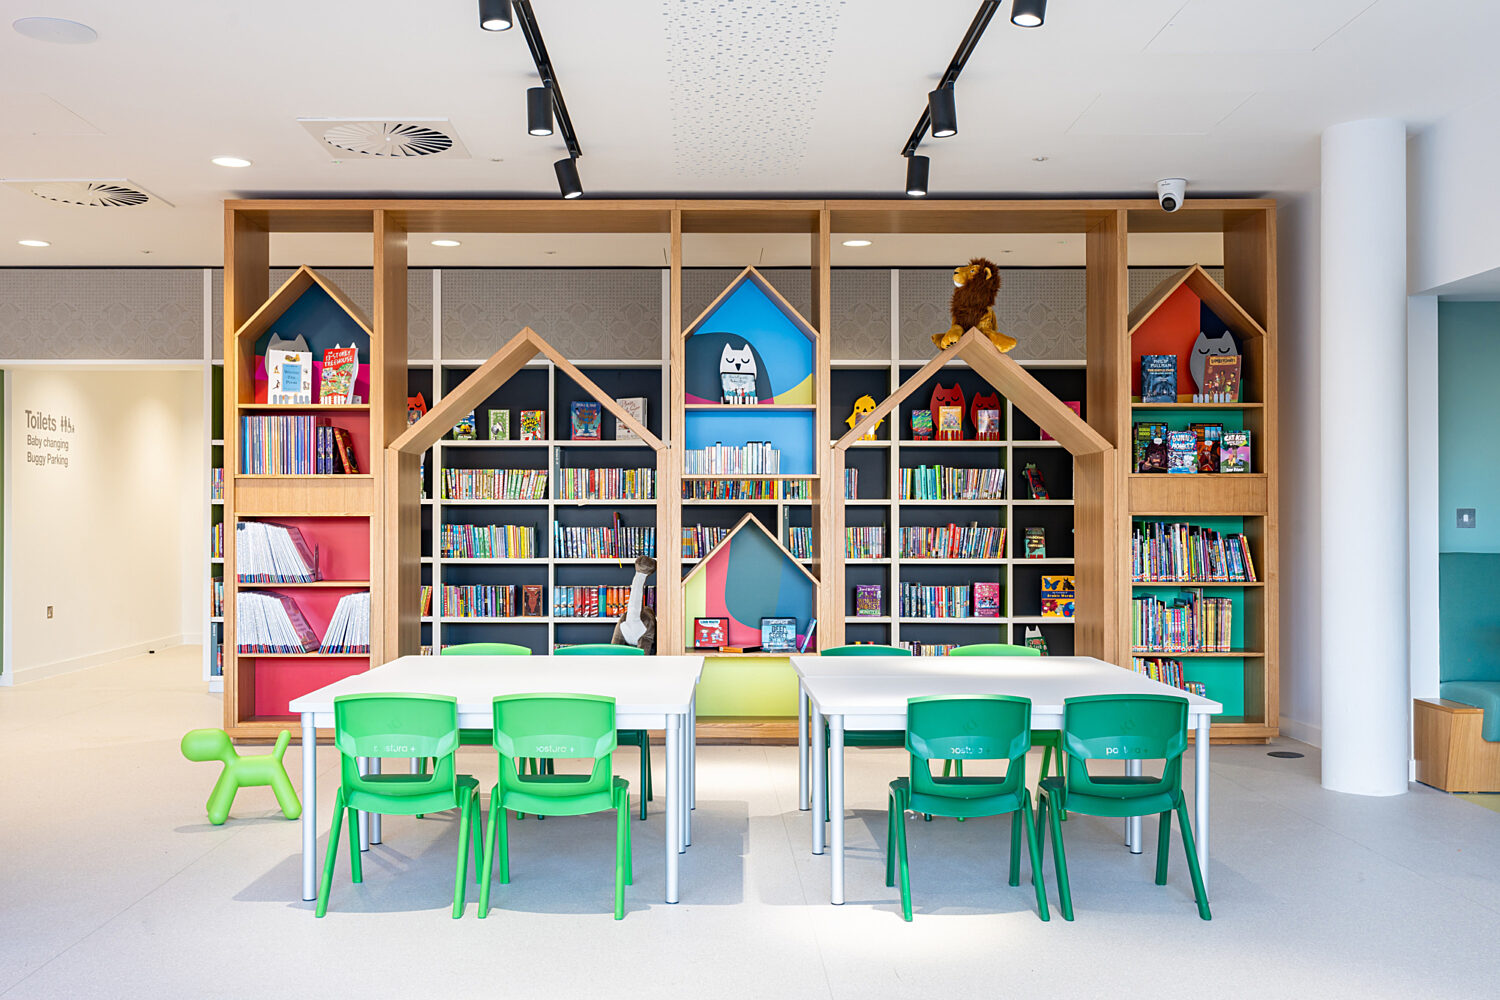 Kids seating and reading area at Nottingham Library